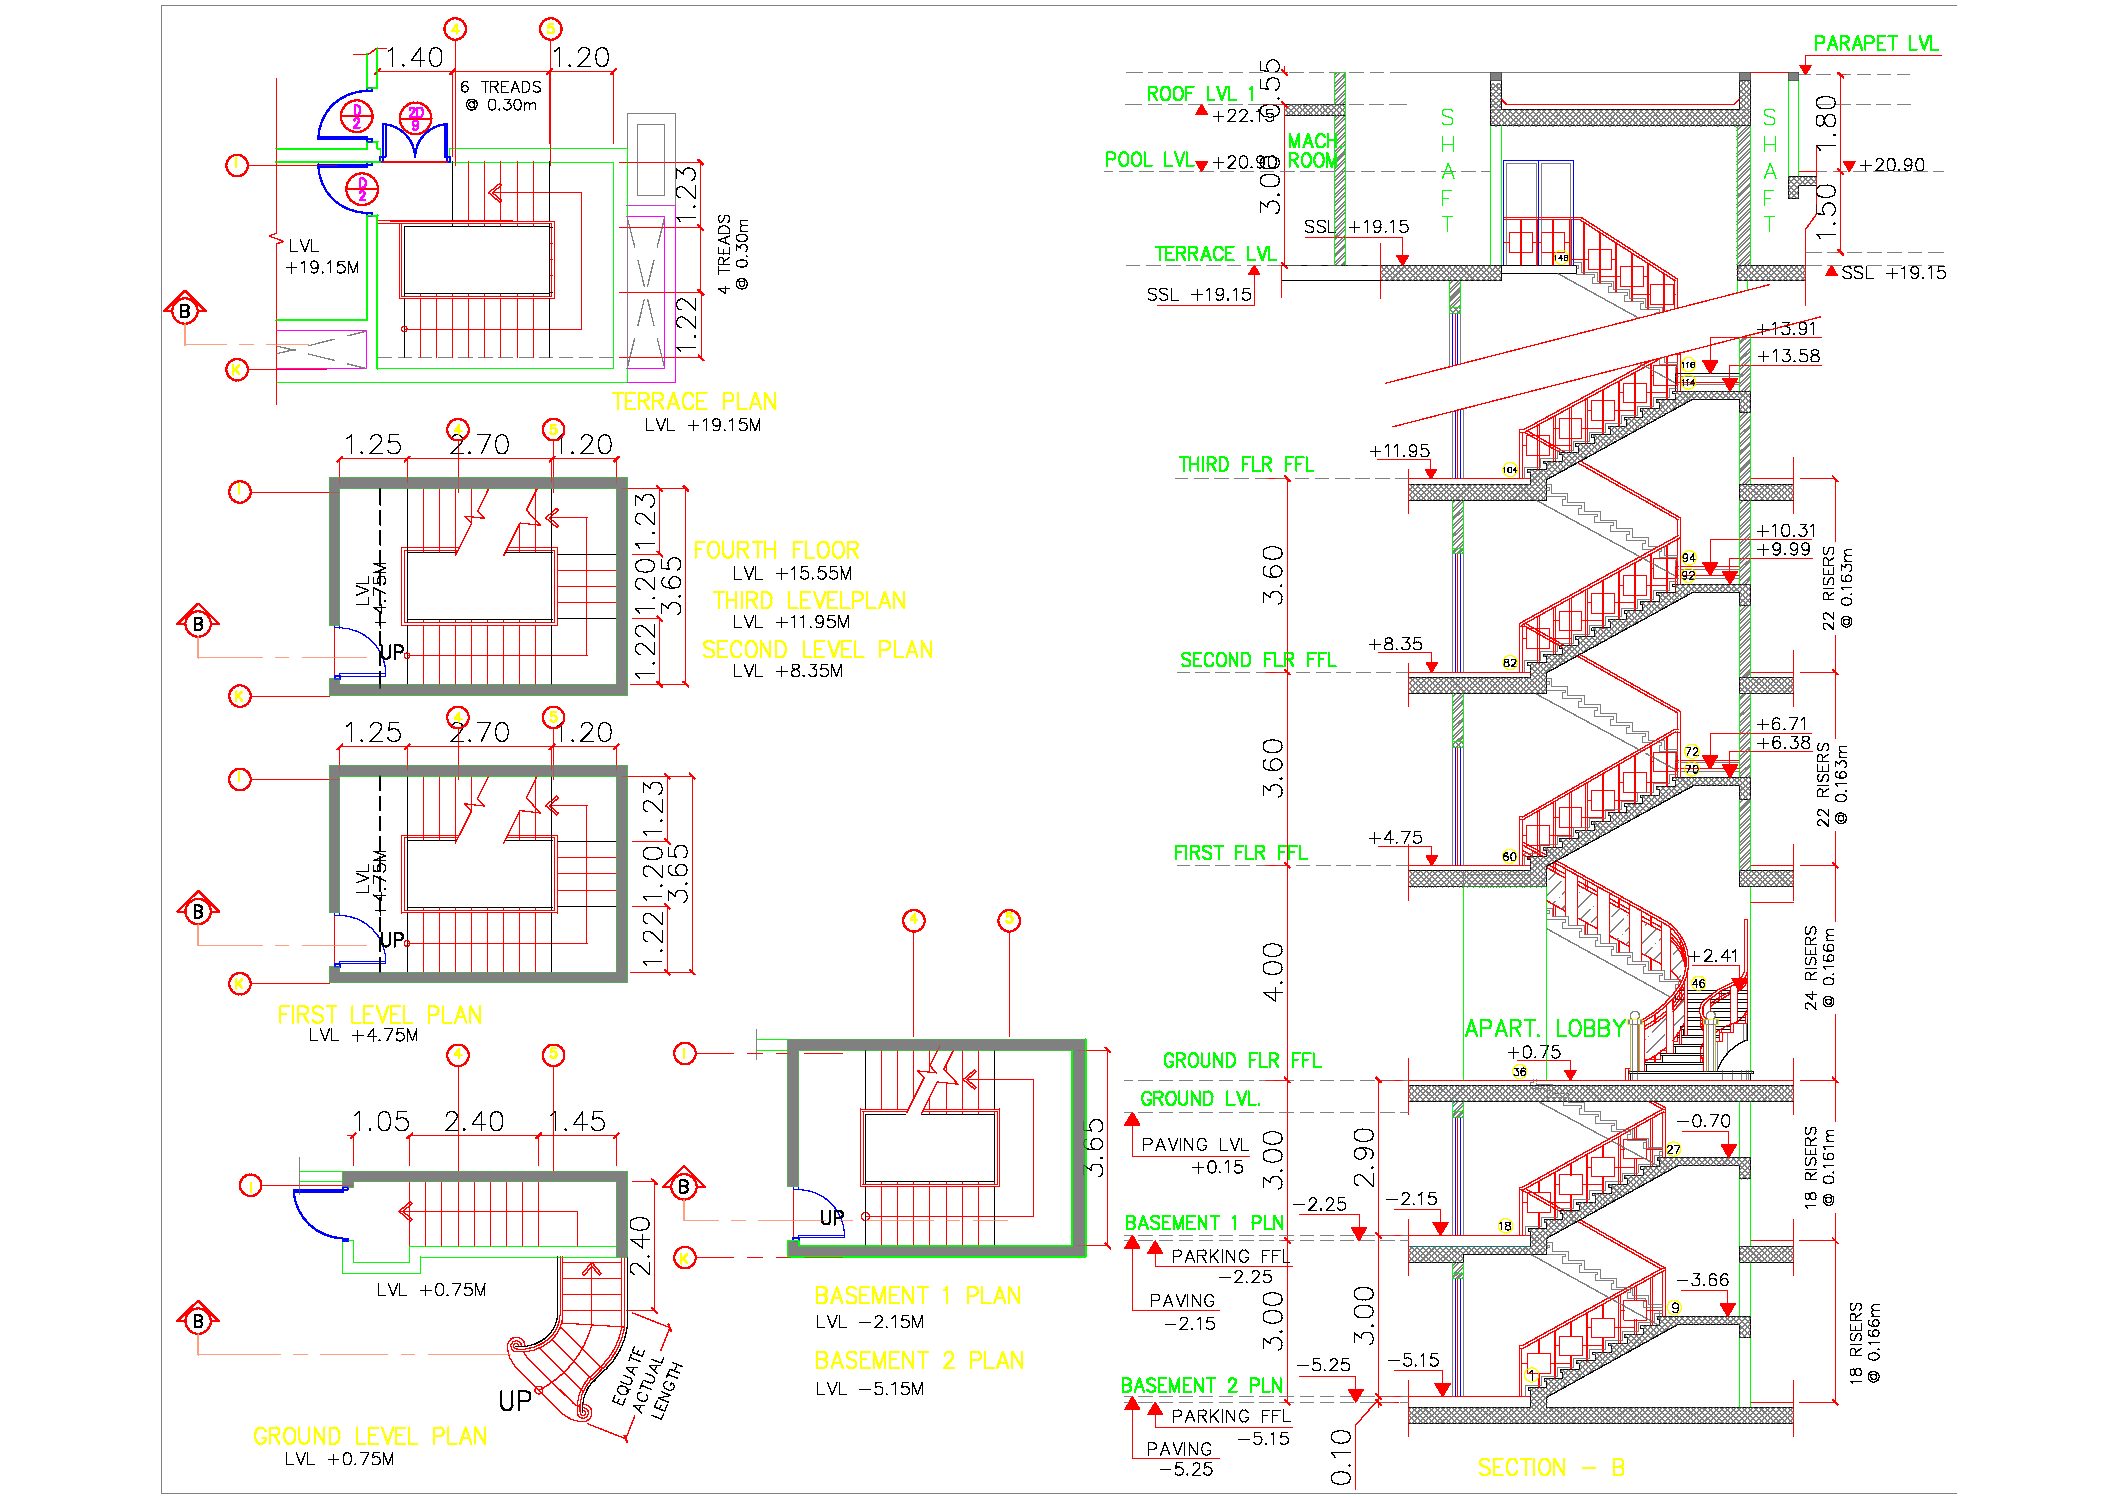 Double stringer steel staircase detail drawing visual reference – Kasia blog